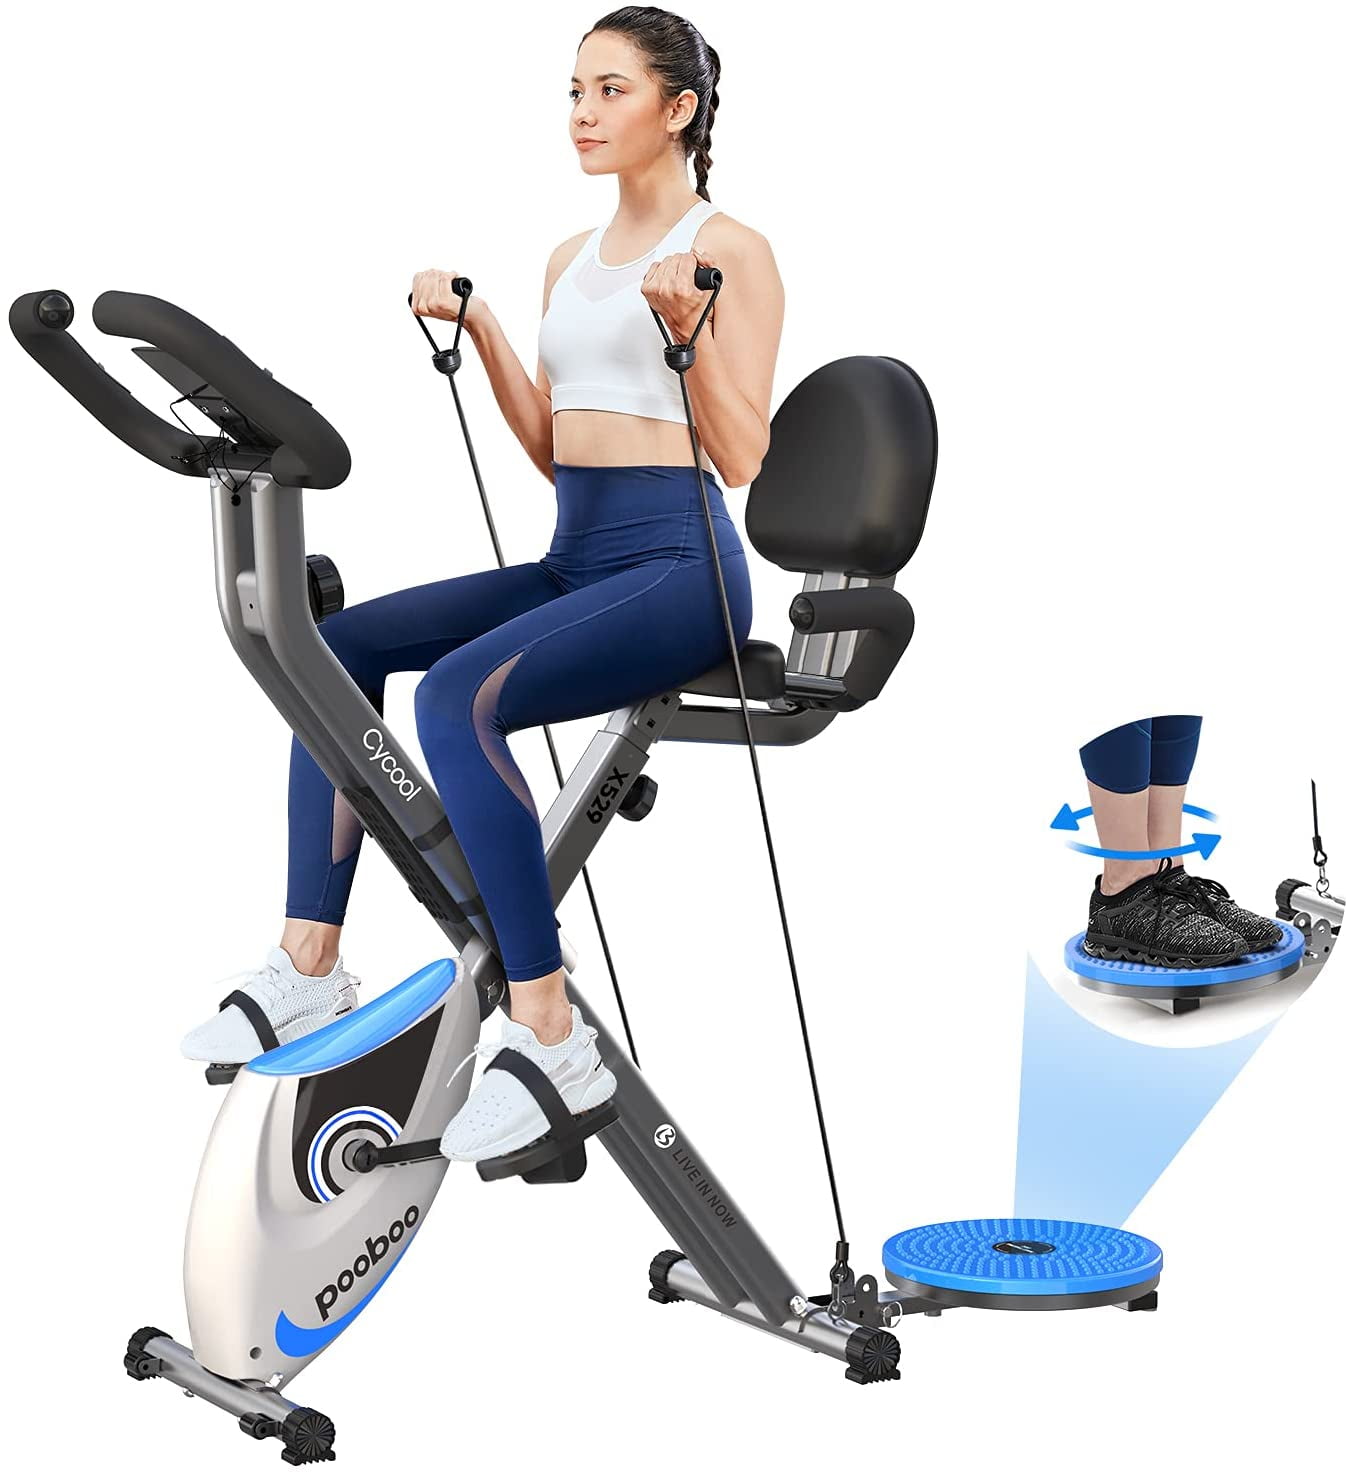 Pooboo 3in1 Folding Magnetic Exercise Bike Indoor Cycling Bikes Upright Stationary Bicycle 240lb